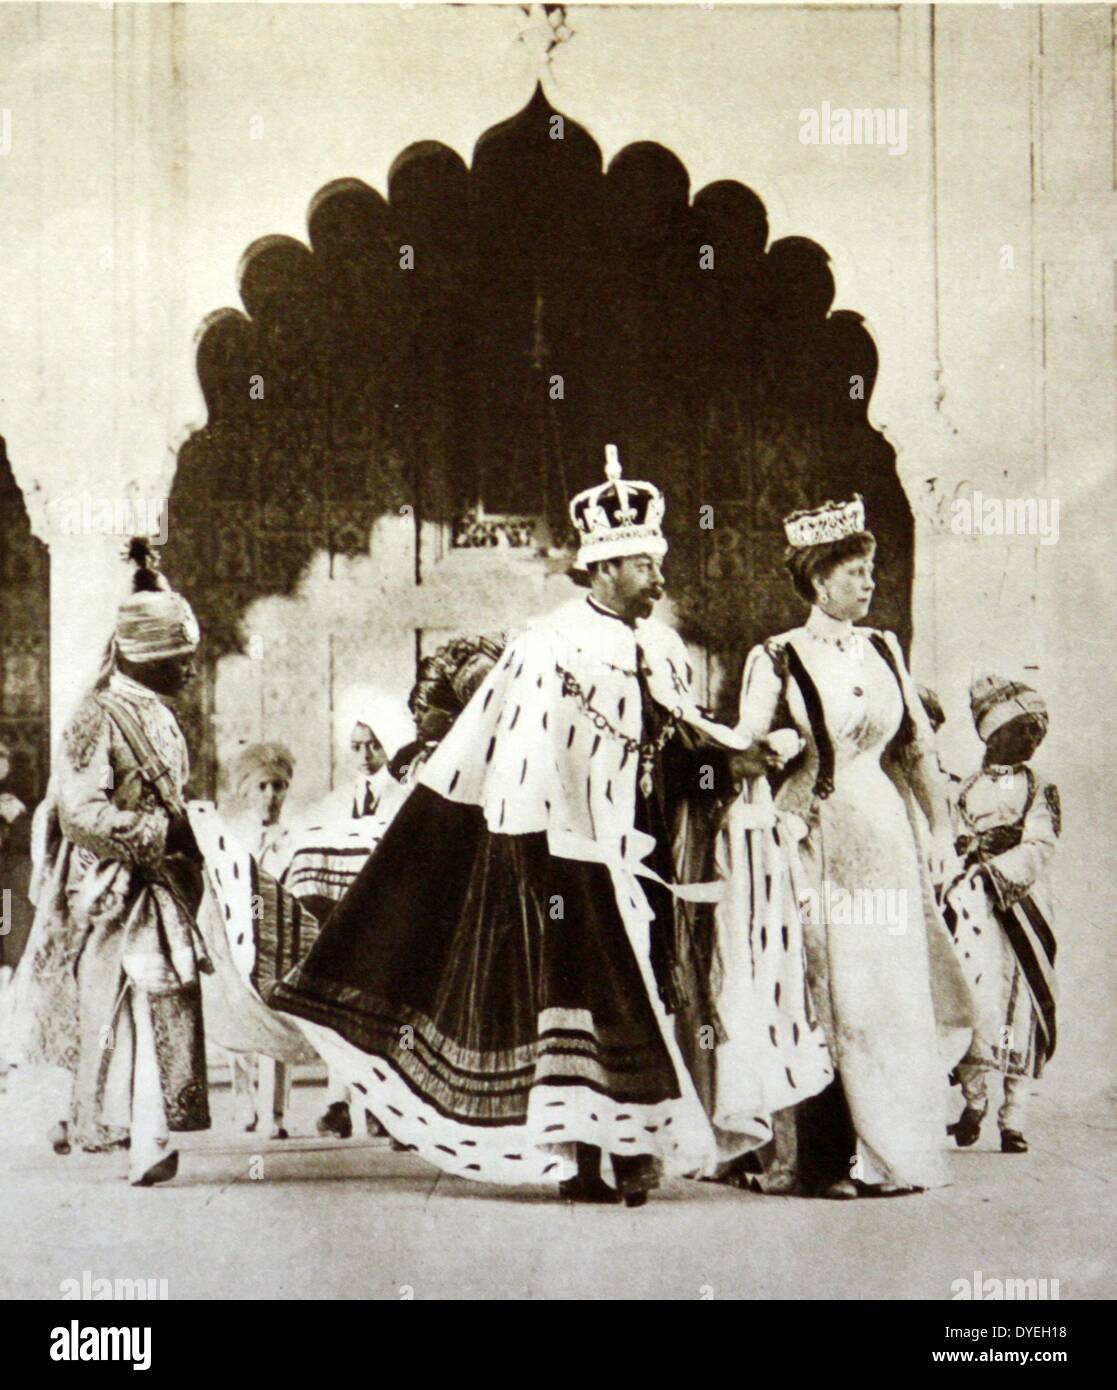 The Delhi Durbar (Hindi: meaning 'Court of Delhi', was a mass assembly At Coronation Park, Delhi, India to mark the coronation of a King and Queen of the United Kingdom. Also known as the Imperial Durbar, it was held three times, in 1877, 1903 and 1911, at the height of the British Empire. King-Emperor and Queen-Empress at Delhi, 1911. Stock Photo